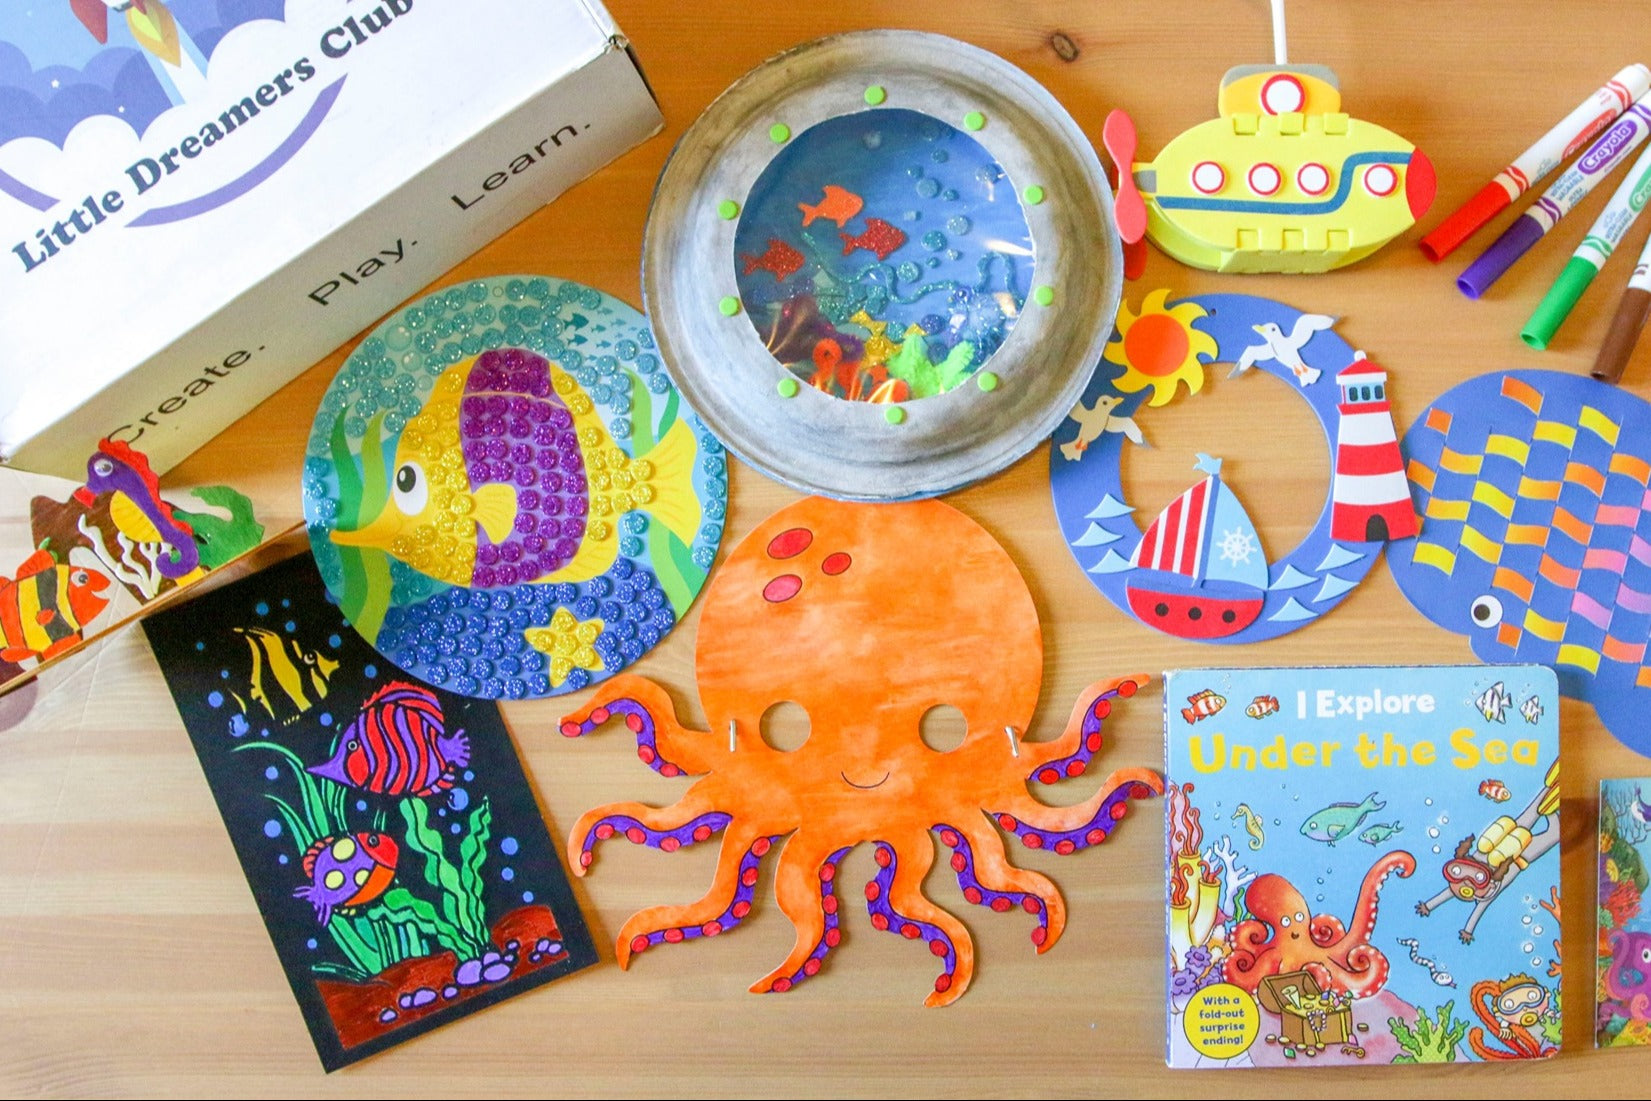 Kraftic Arts And Crafts Supplies Set For Kids Ages 4-8, Giftable Art Box  With 2